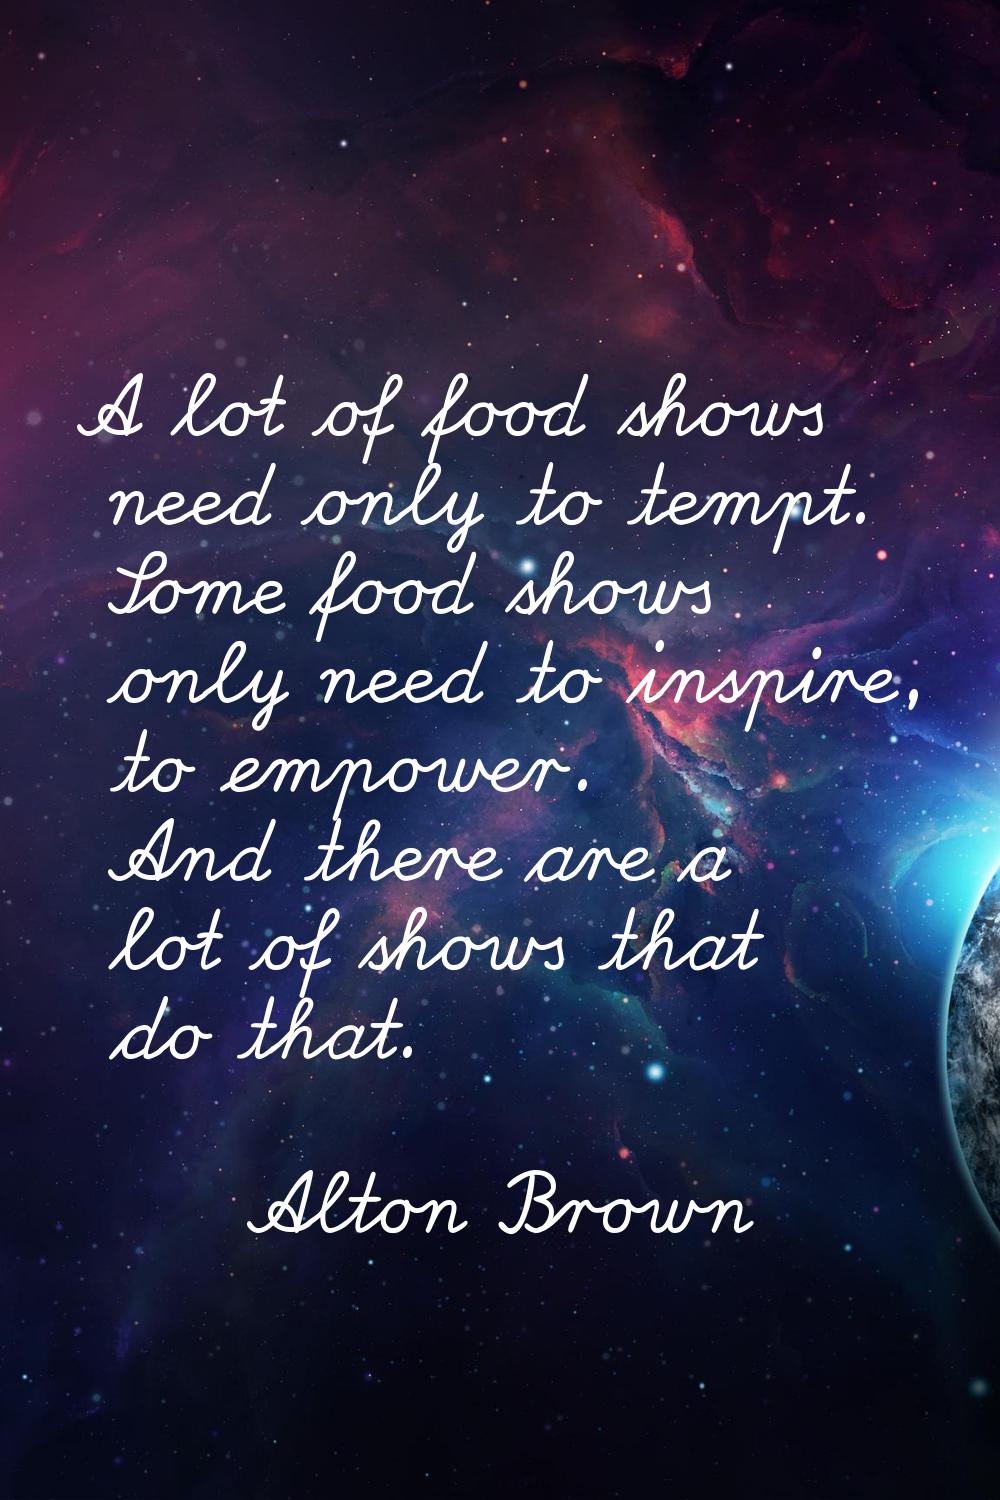 A lot of food shows need only to tempt. Some food shows only need to inspire, to empower. And there